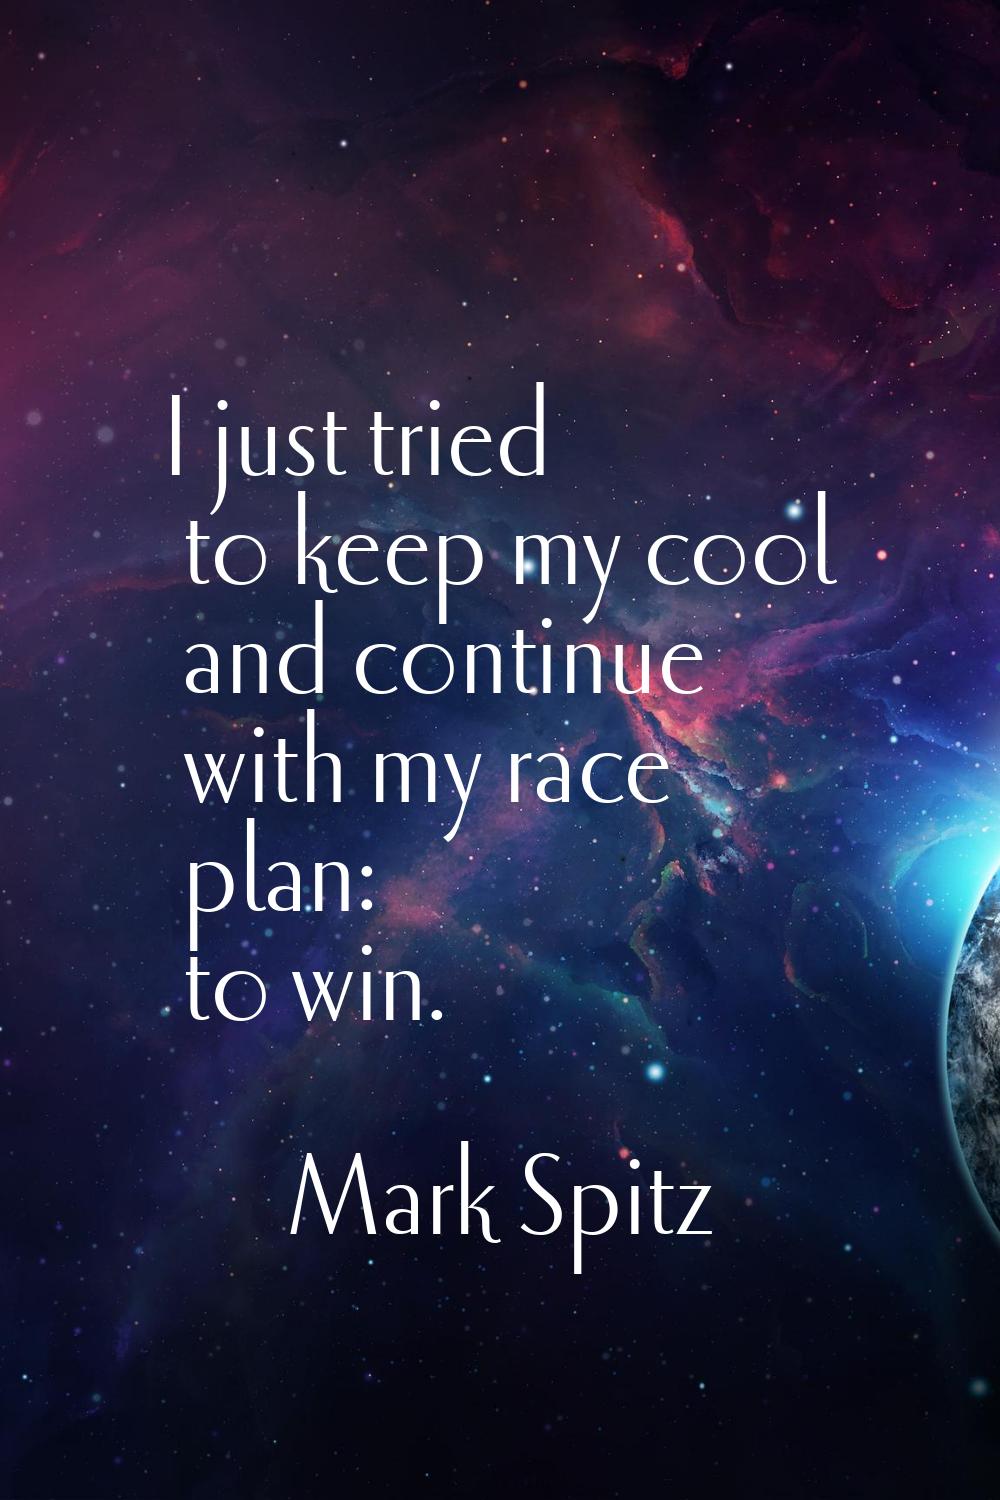 I just tried to keep my cool and continue with my race plan: to win.